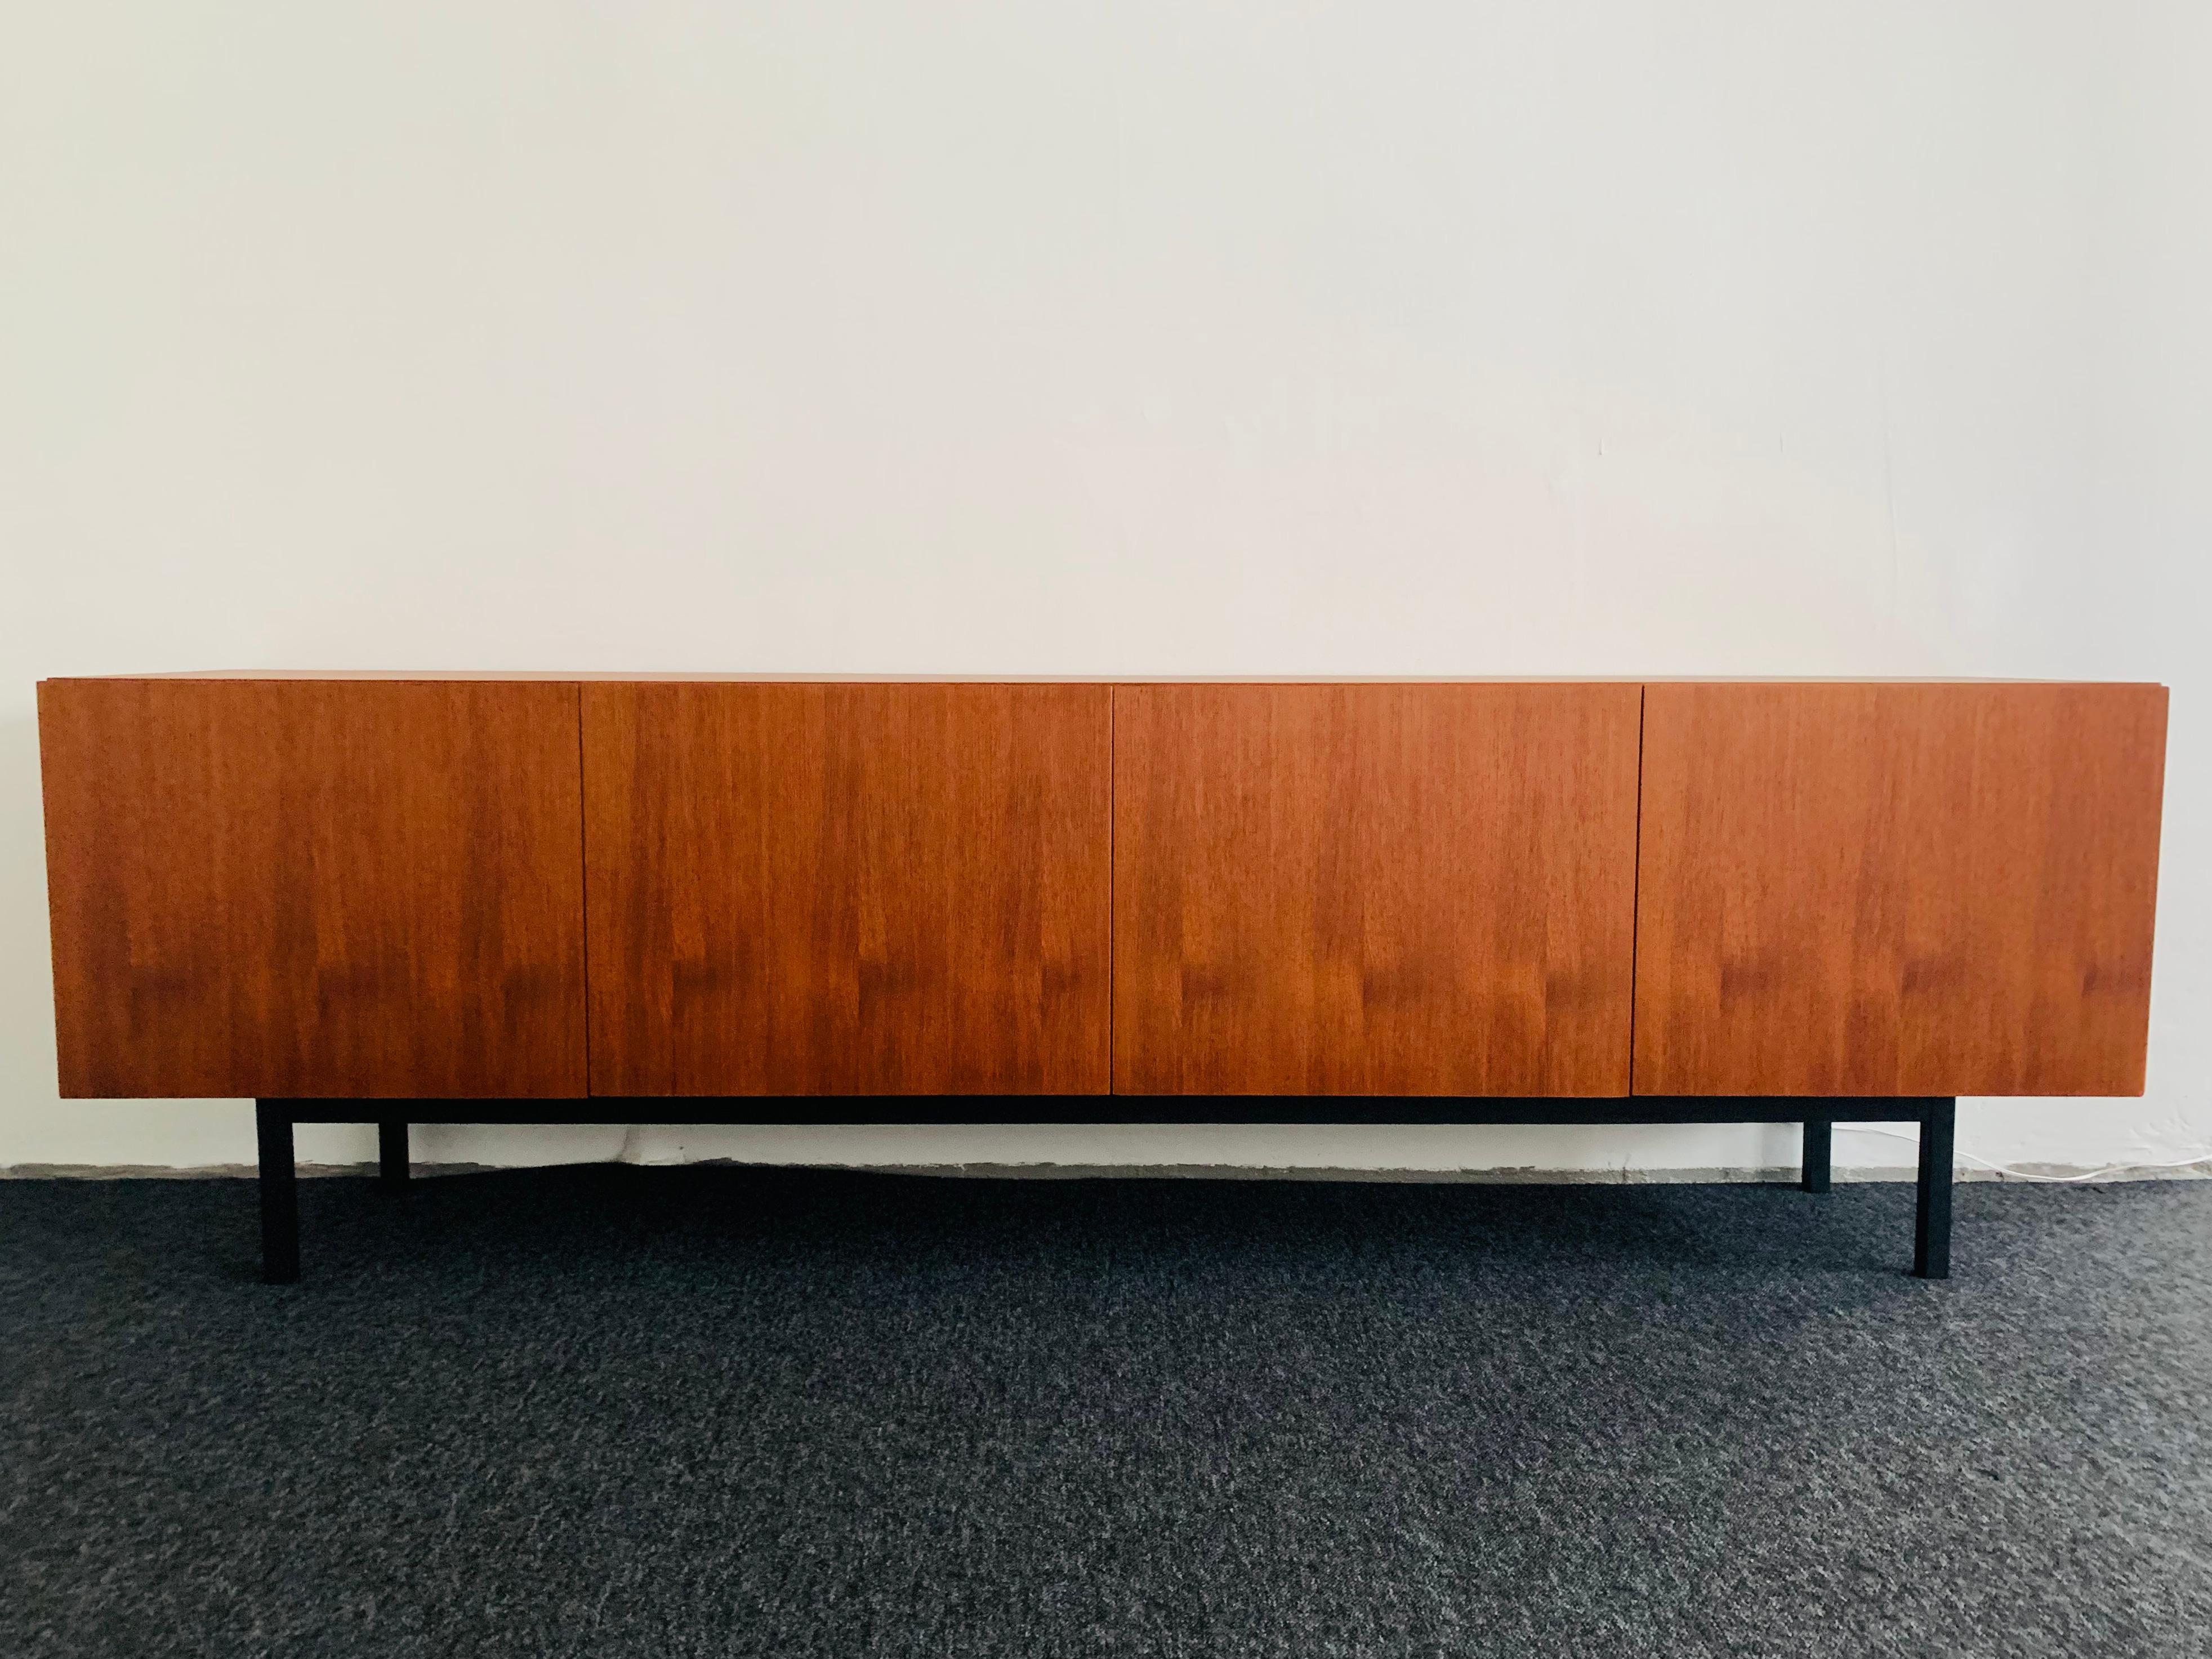 Exceptionally beautiful Danish teak sideboard from the 1960s.
Very high-quality workmanship and elegant design.

Condition:

Very good vintage condition with slight signs of wear consistent with age.
The surface has been lovingly